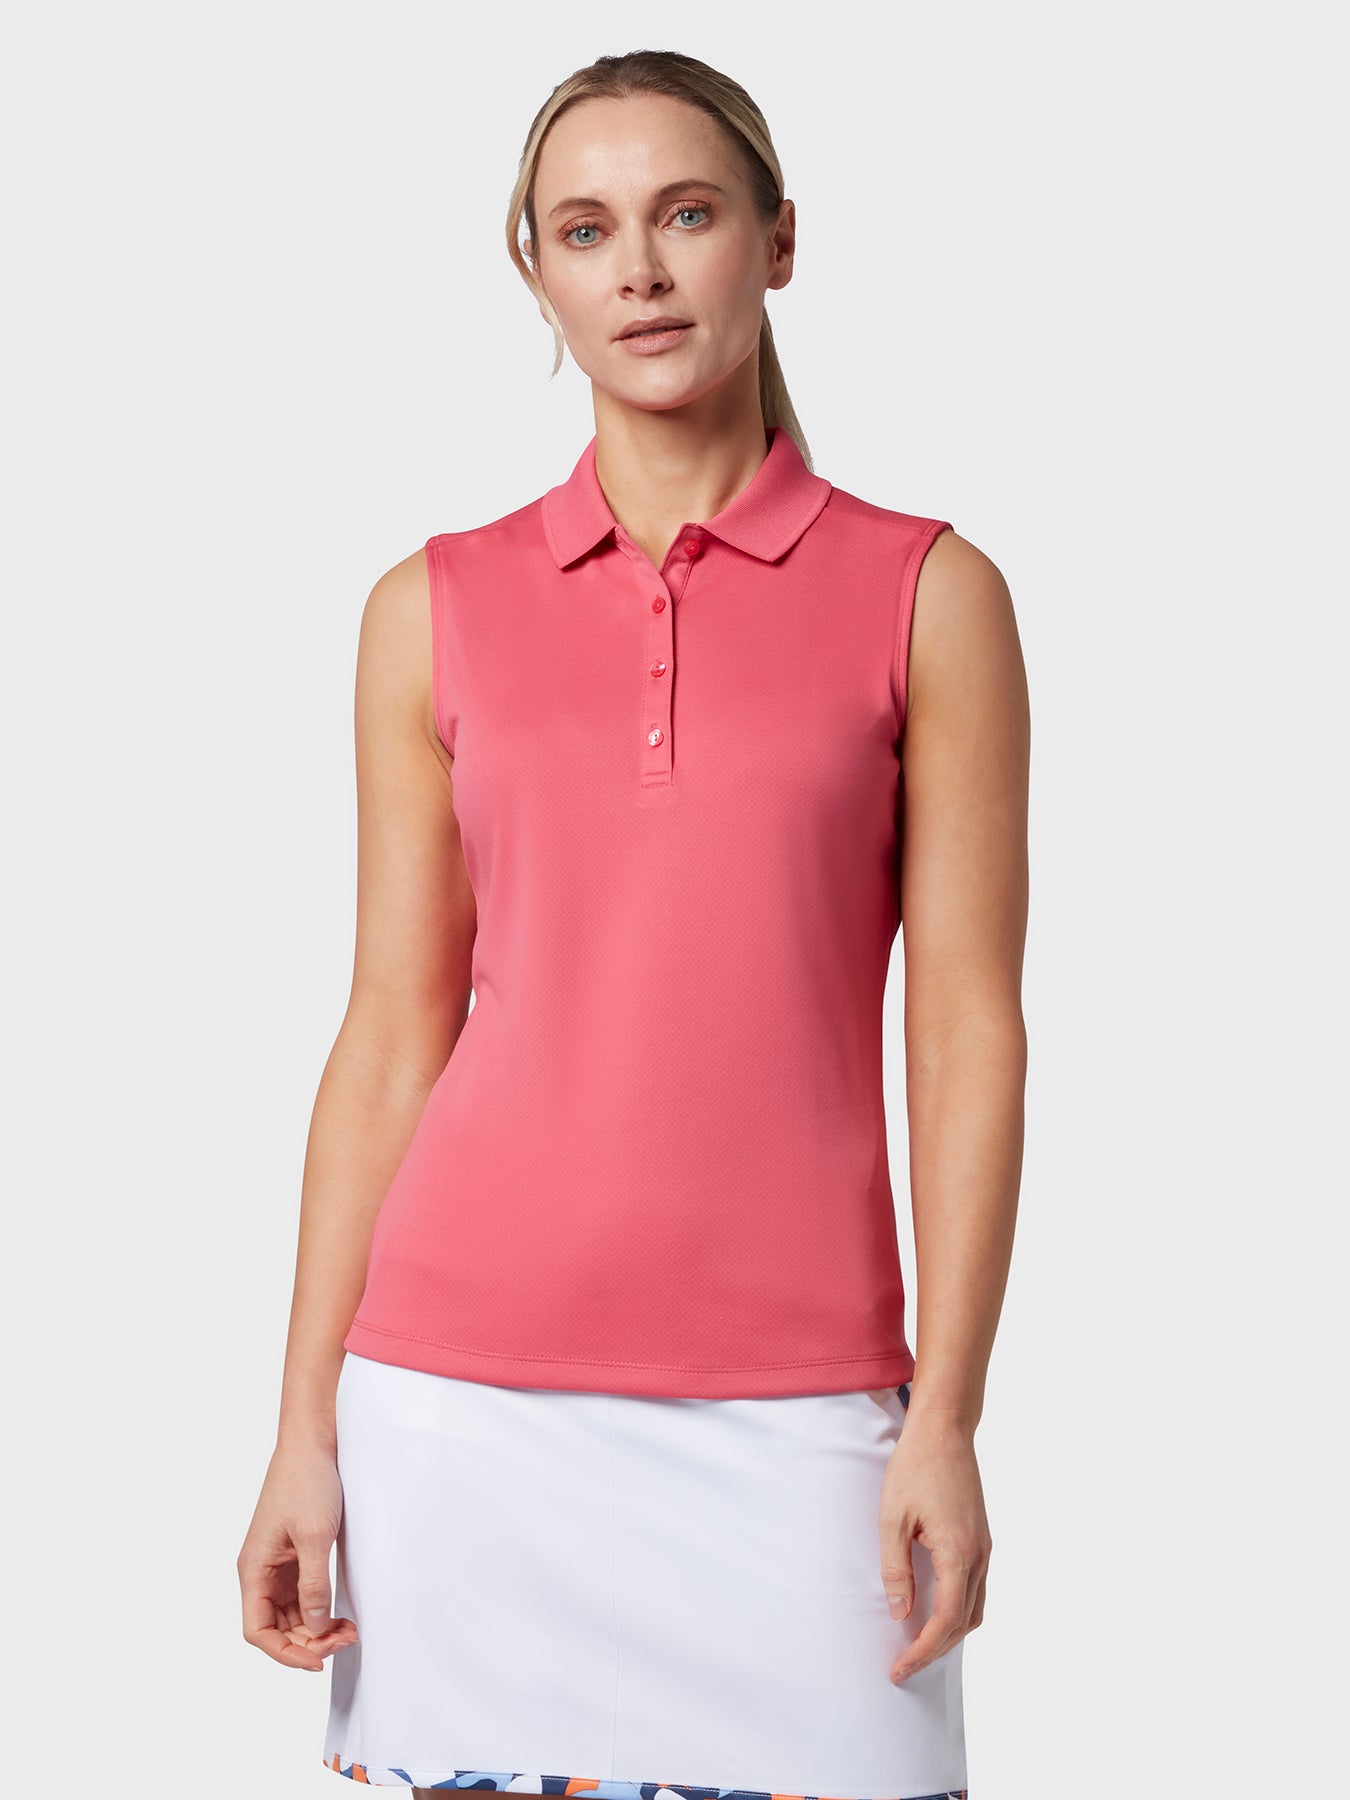 View Sleeveless Womens Polo In Fruit Dove Fruit Dove XXL information